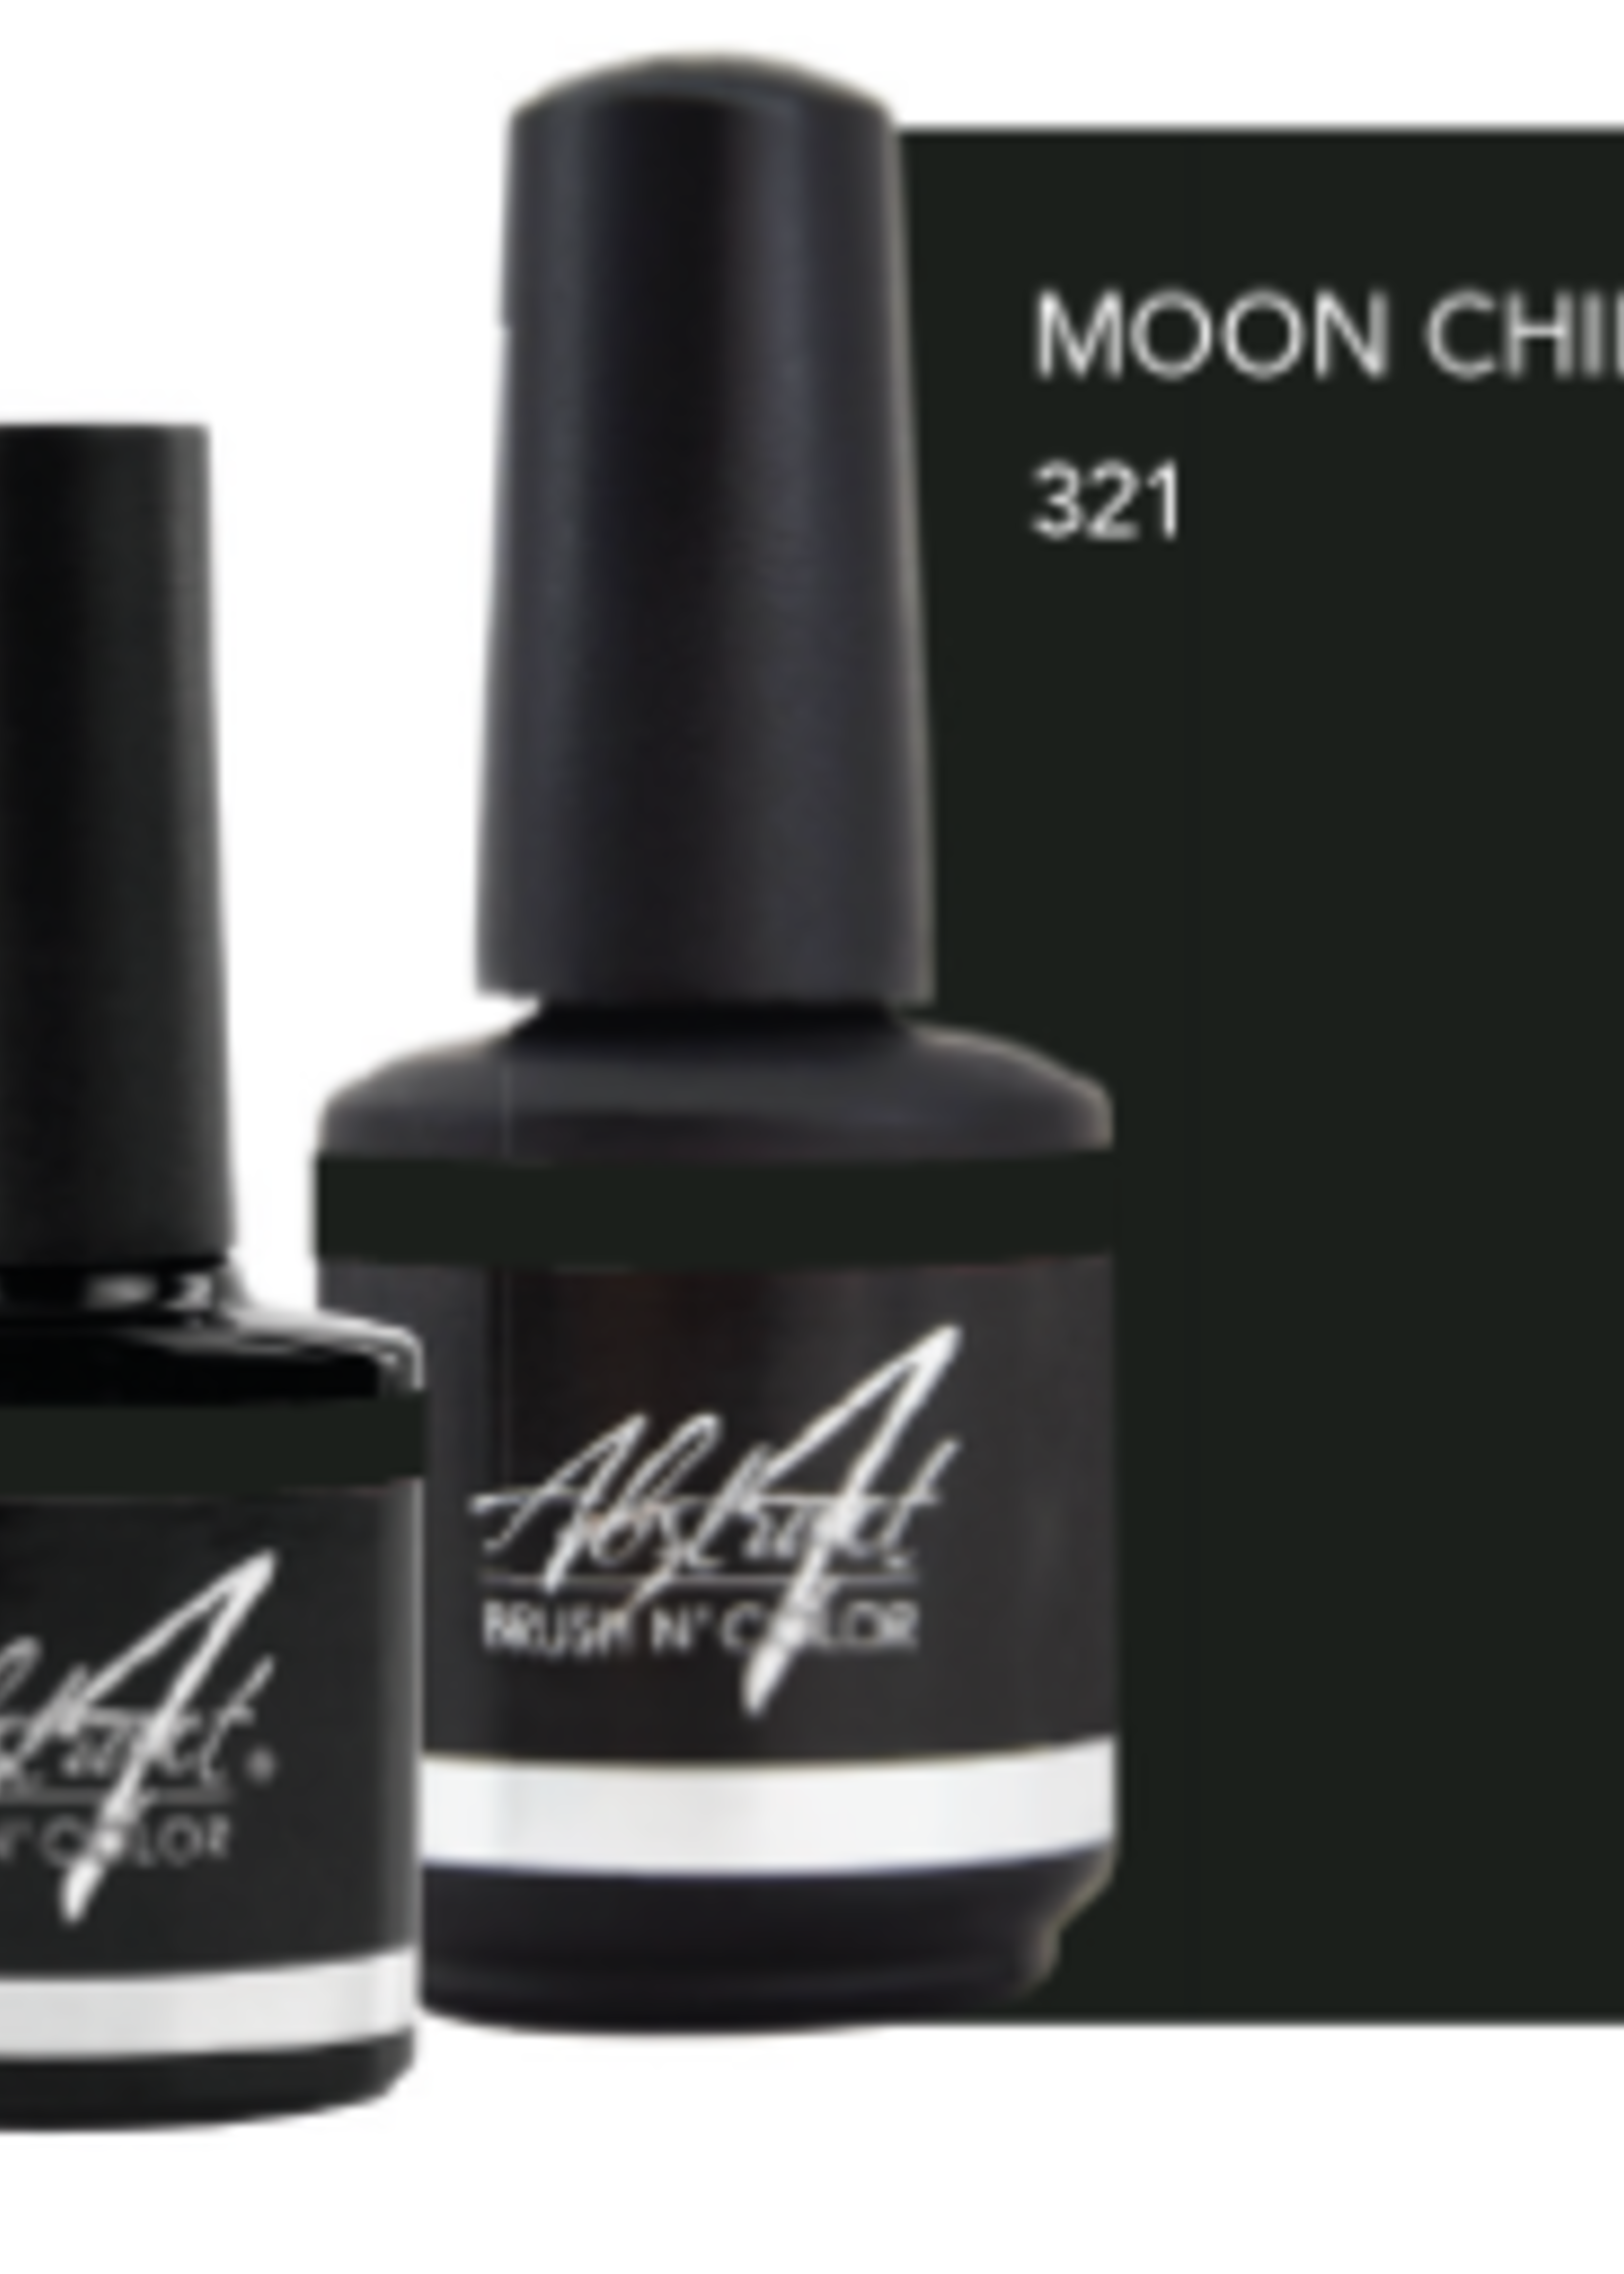 Abstract® Brush N' Color Tiny 7.5 ml Moon Child